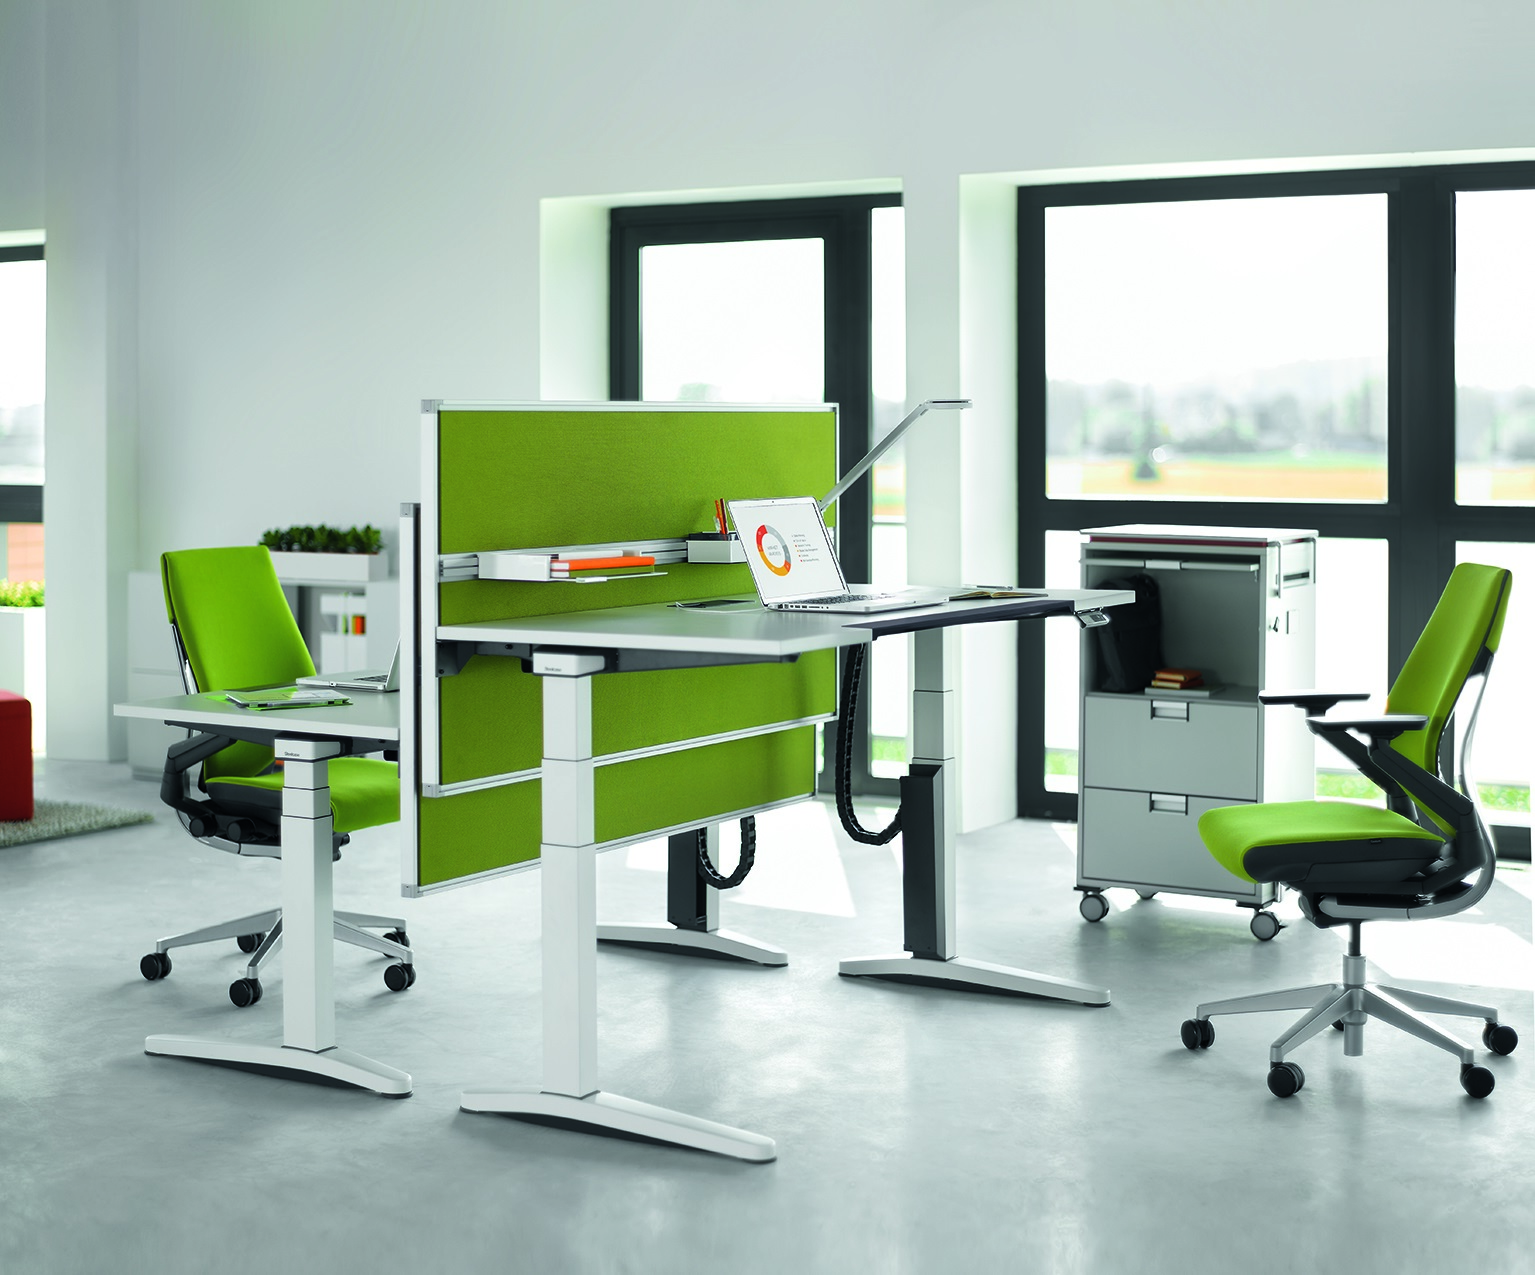 OLOGY: THE DESK THAT CREATES HEALTH-CONCIOUS WORK ENVIRONMENTS